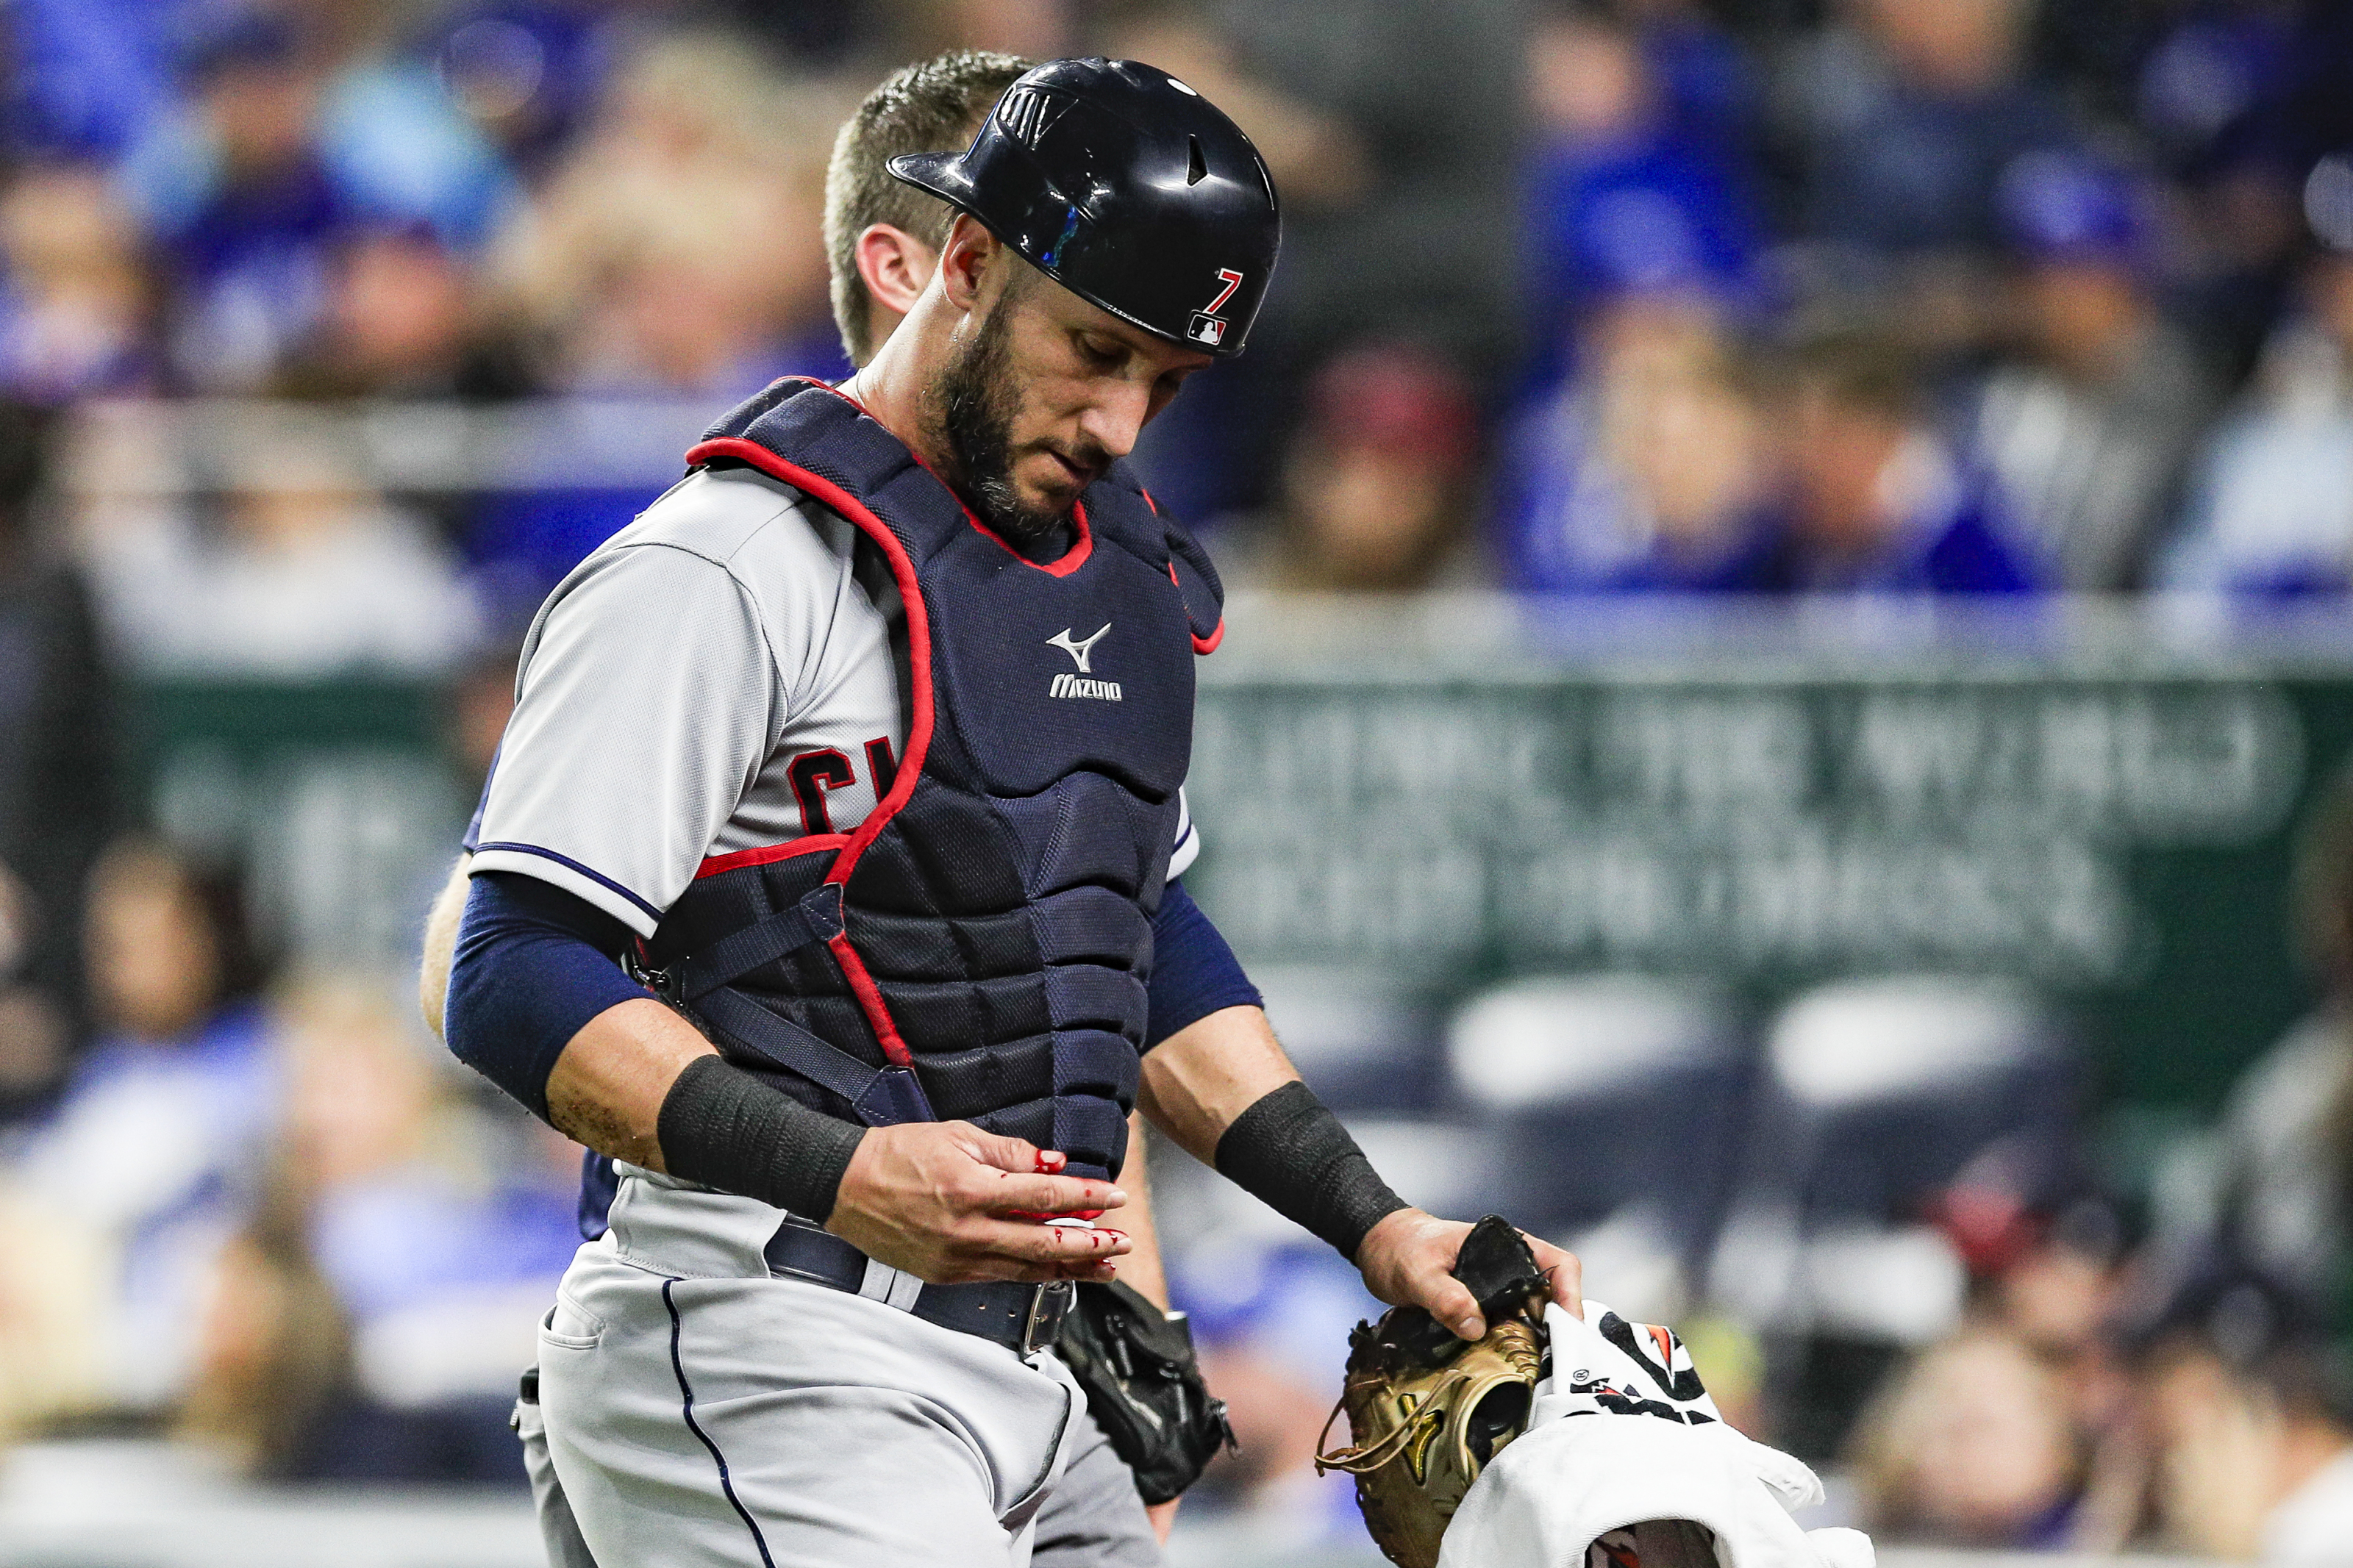 Yan Gomes was one of the best catchers in the American League in